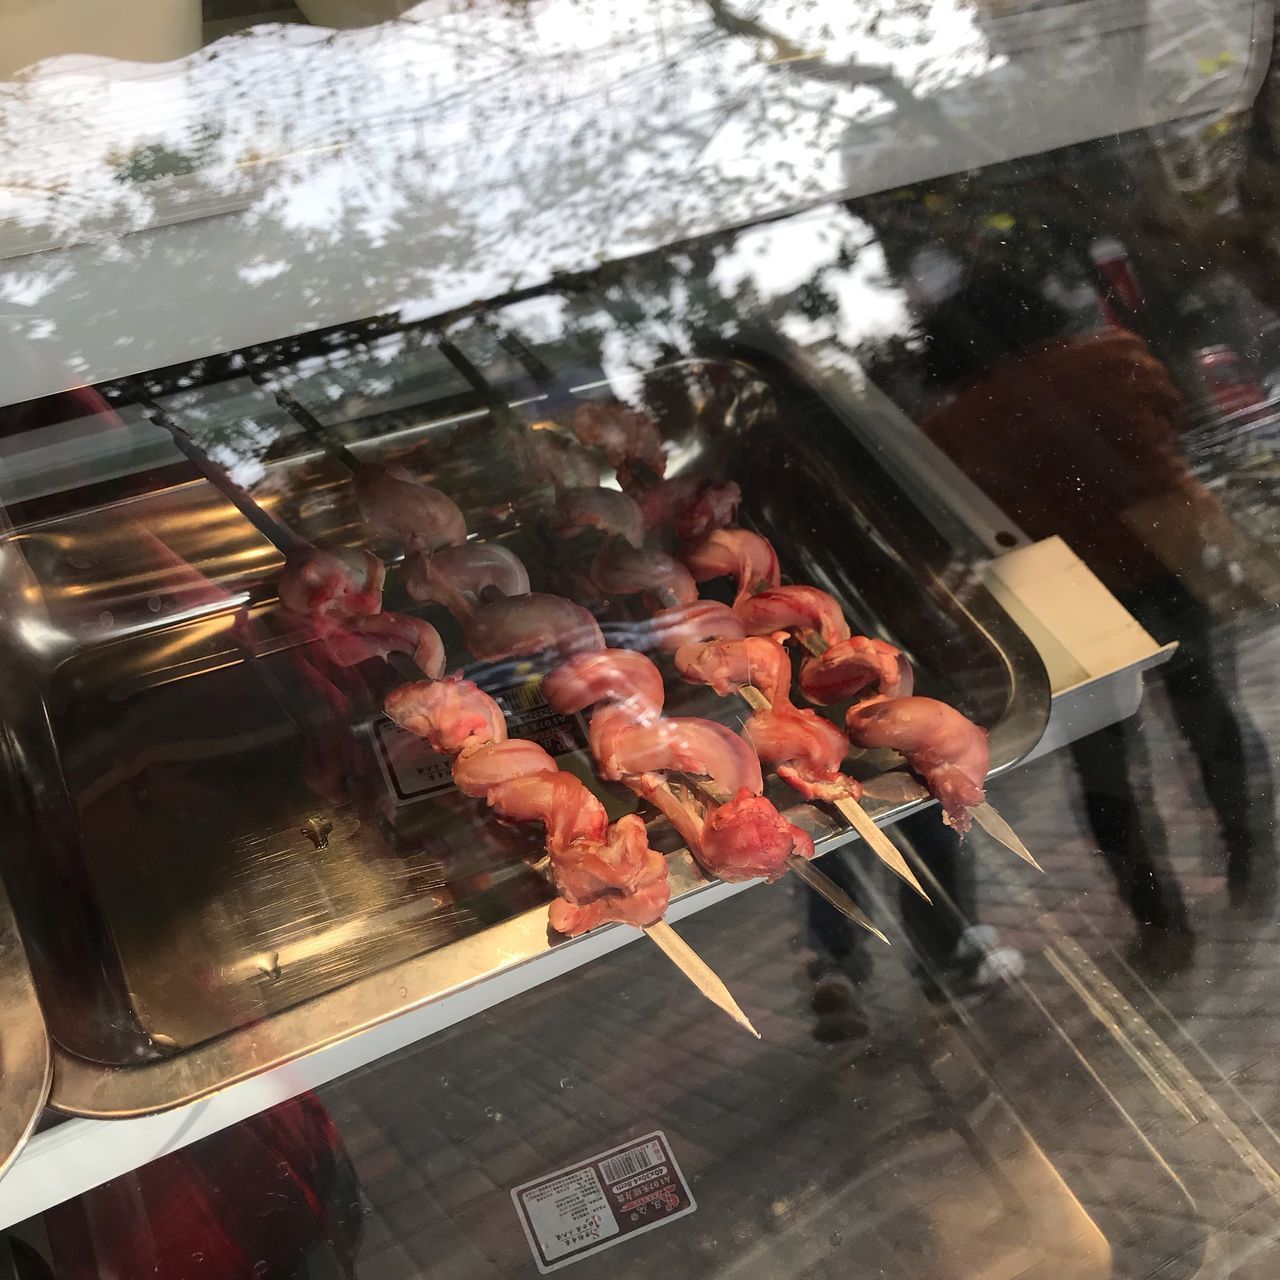 HIGH ANGLE VIEW OF MEAT IN BARBECUE GRILL